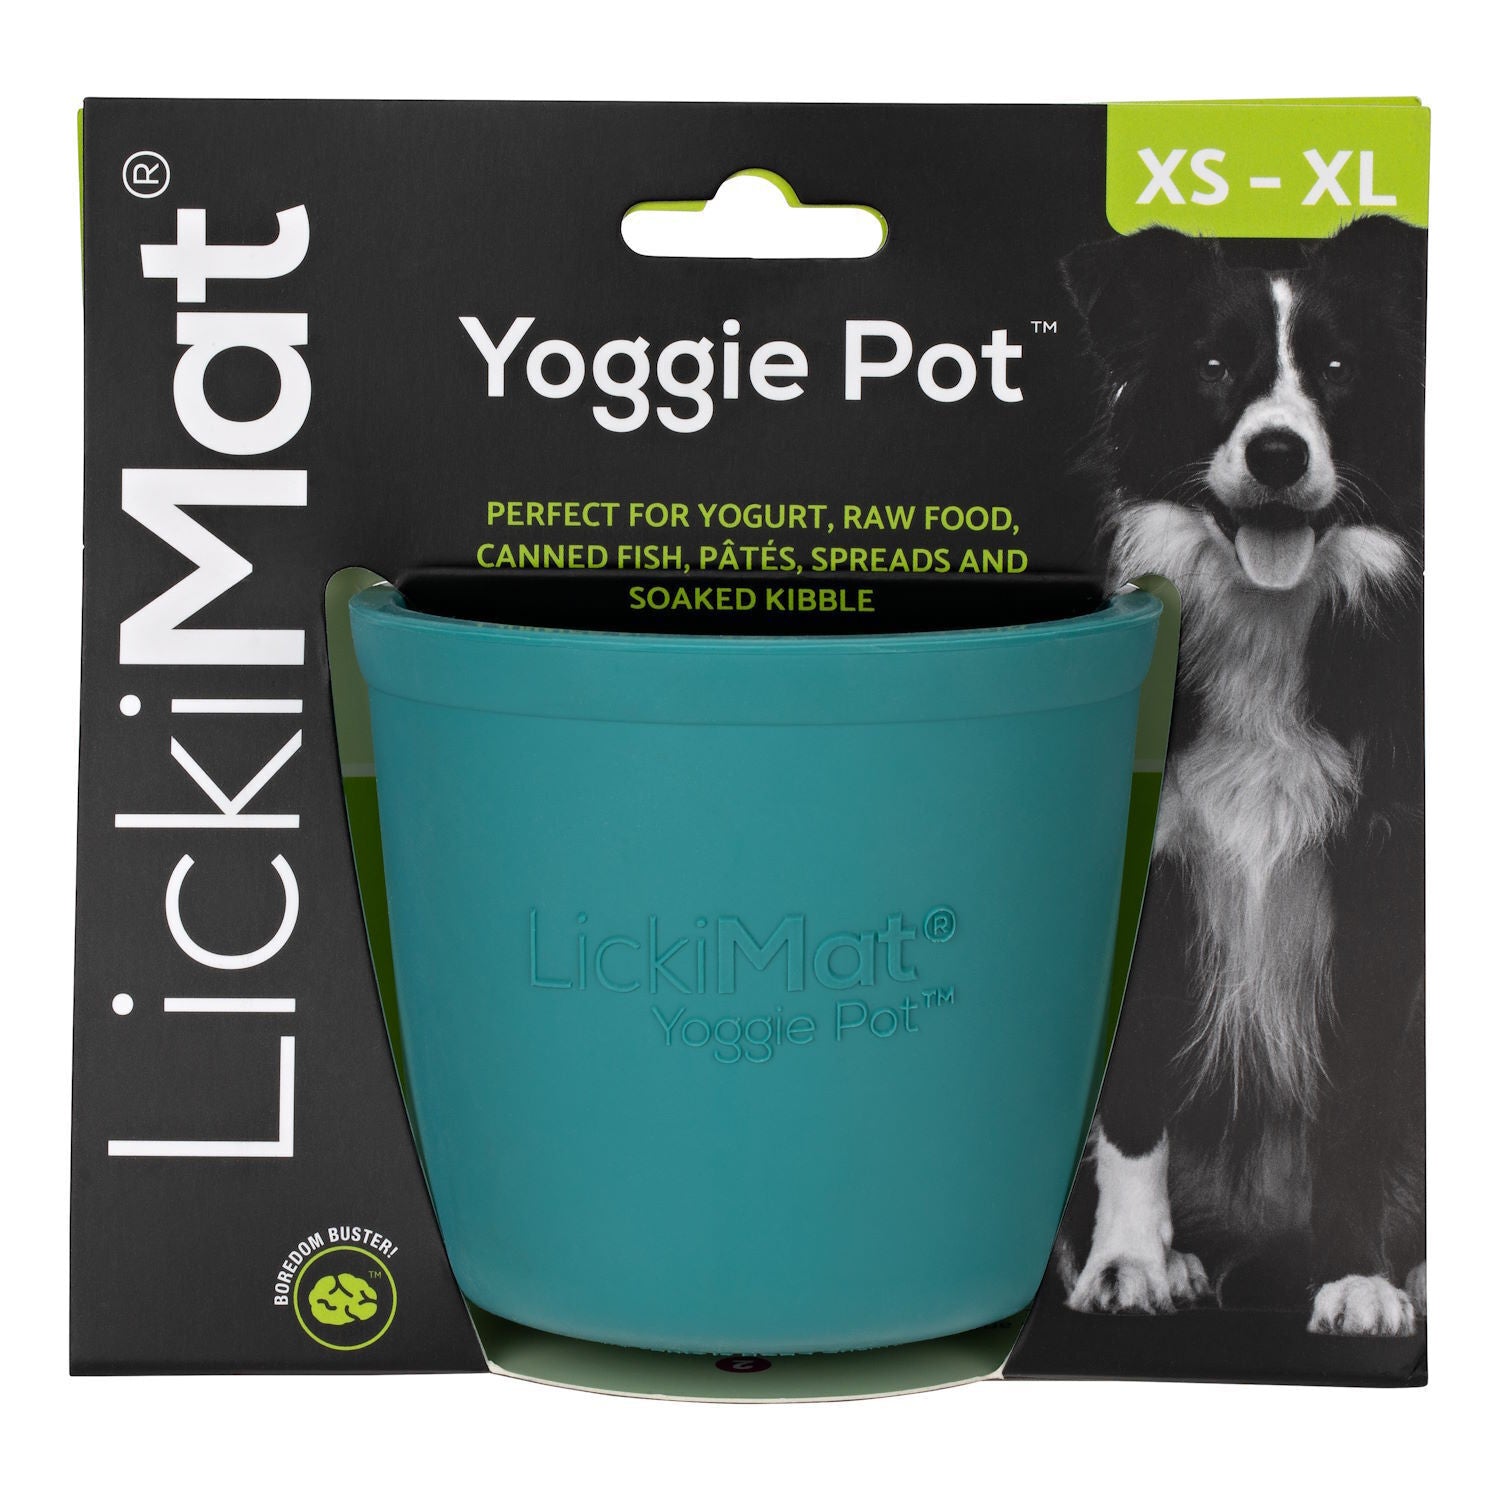 Dog treat puzzle toy called "LickiMat: Yoggie Pot Slow Feeder Bowl" designed for various types of dog food, featuring enrichment and slow feeding features, with a black and white collie on the packaging by Your Whole Dog.